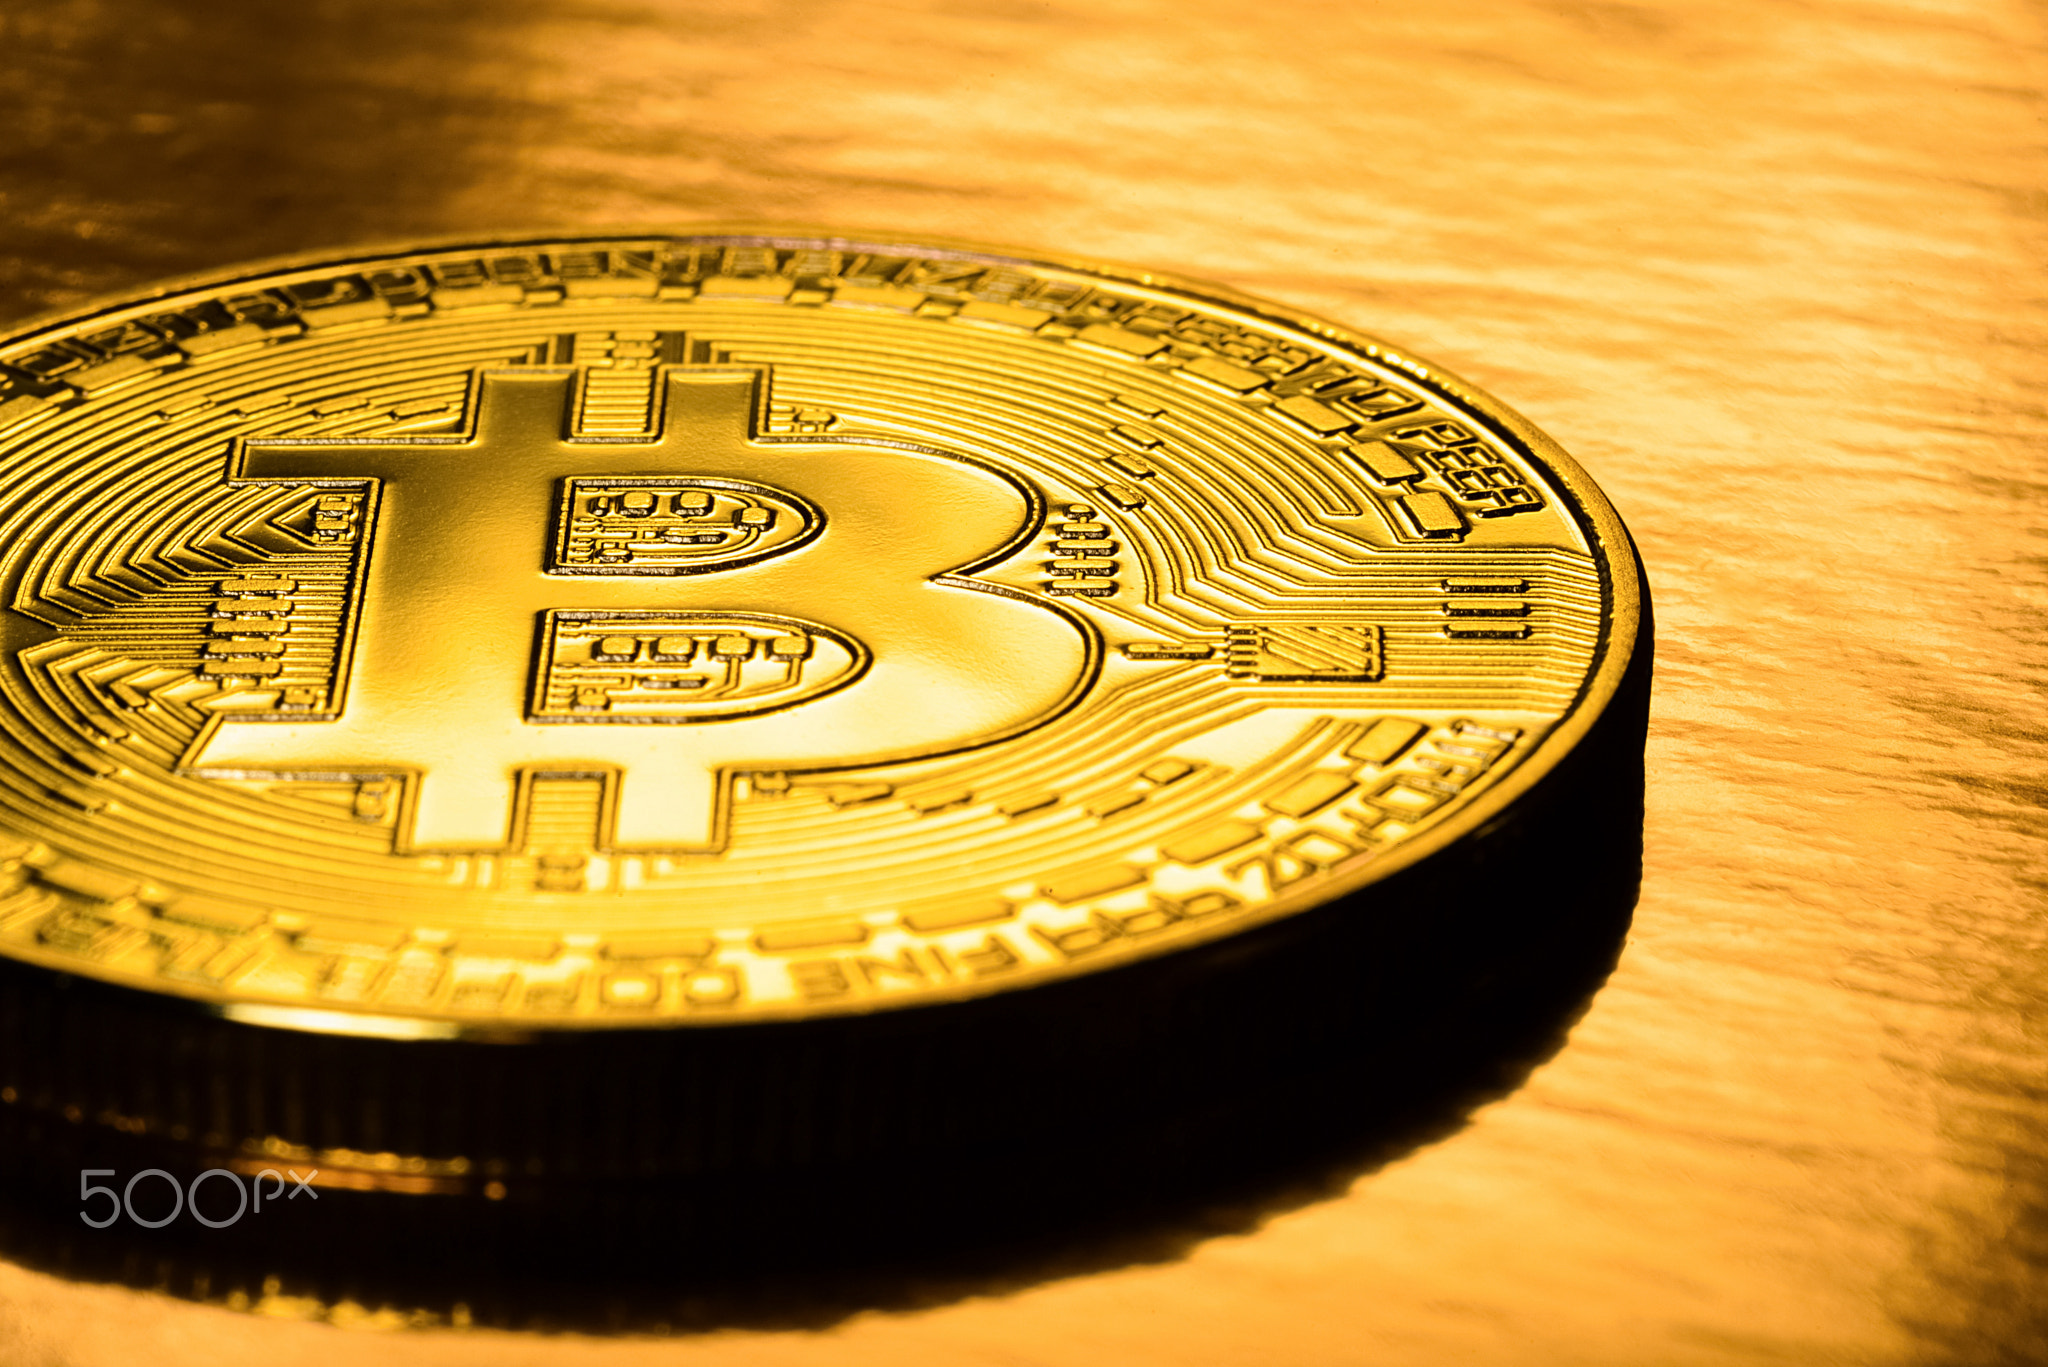 Golden bitcoin on a gold background. Physical e-cryptocurrency coins.